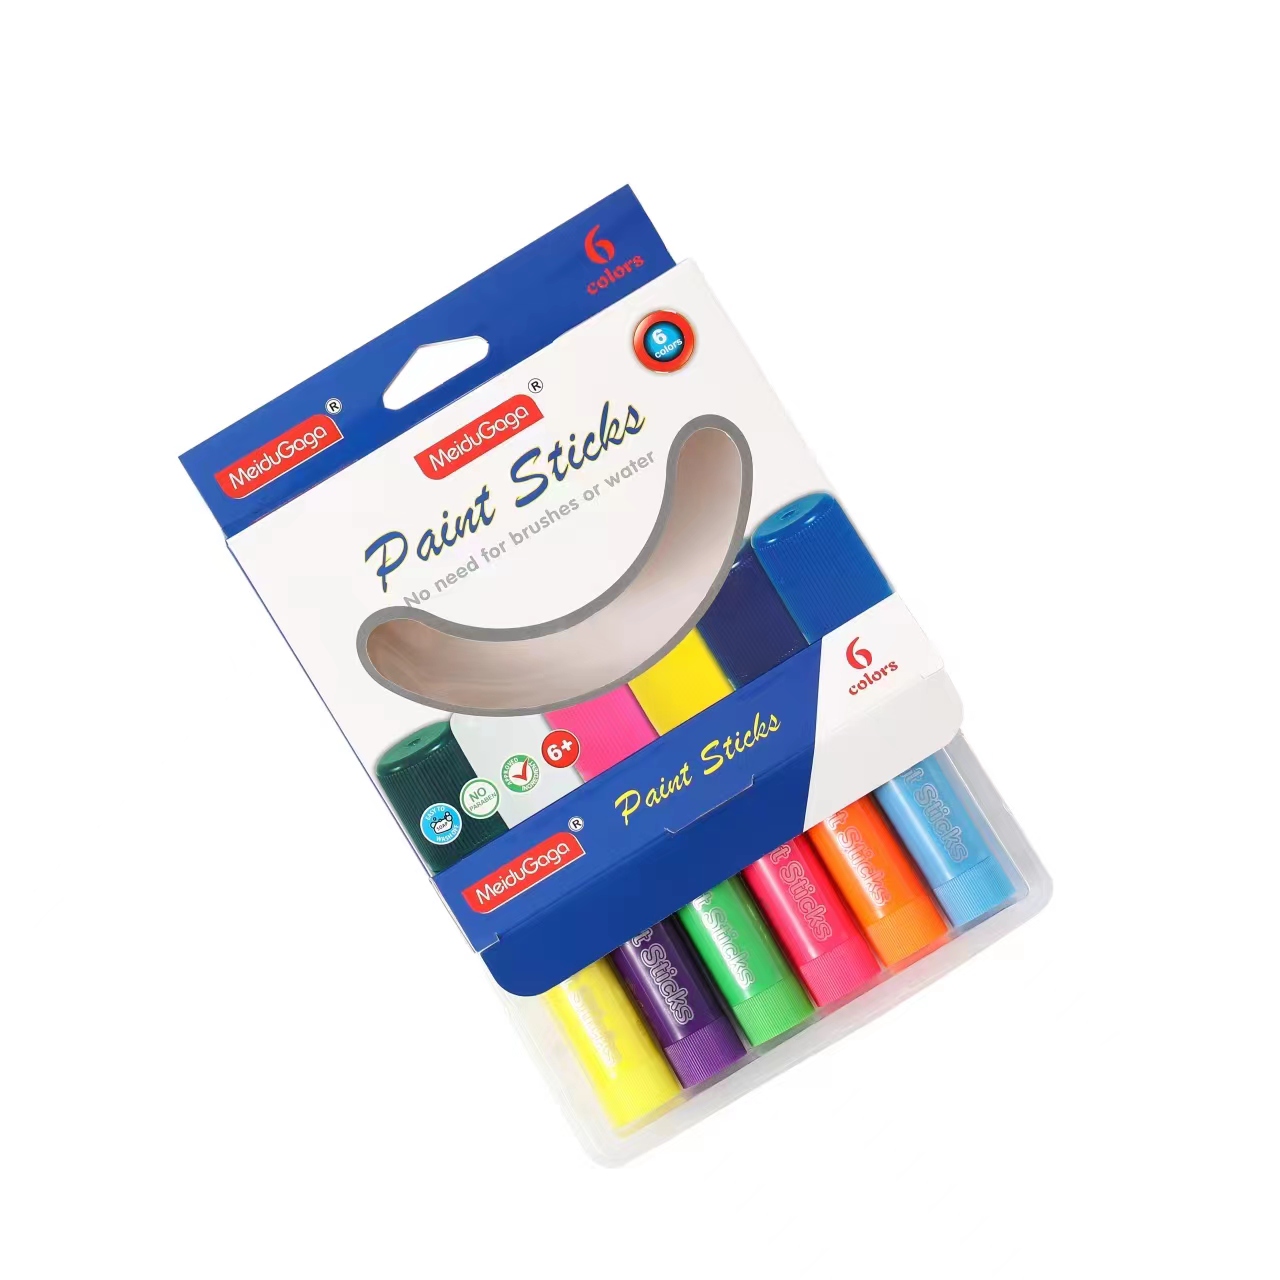 Tempera Paint Sticks, 32 Colors Solid Tempera Paint for Kids, Super Quick  Drying, Works Great on Paper Wood Glass Ceramic Canvas